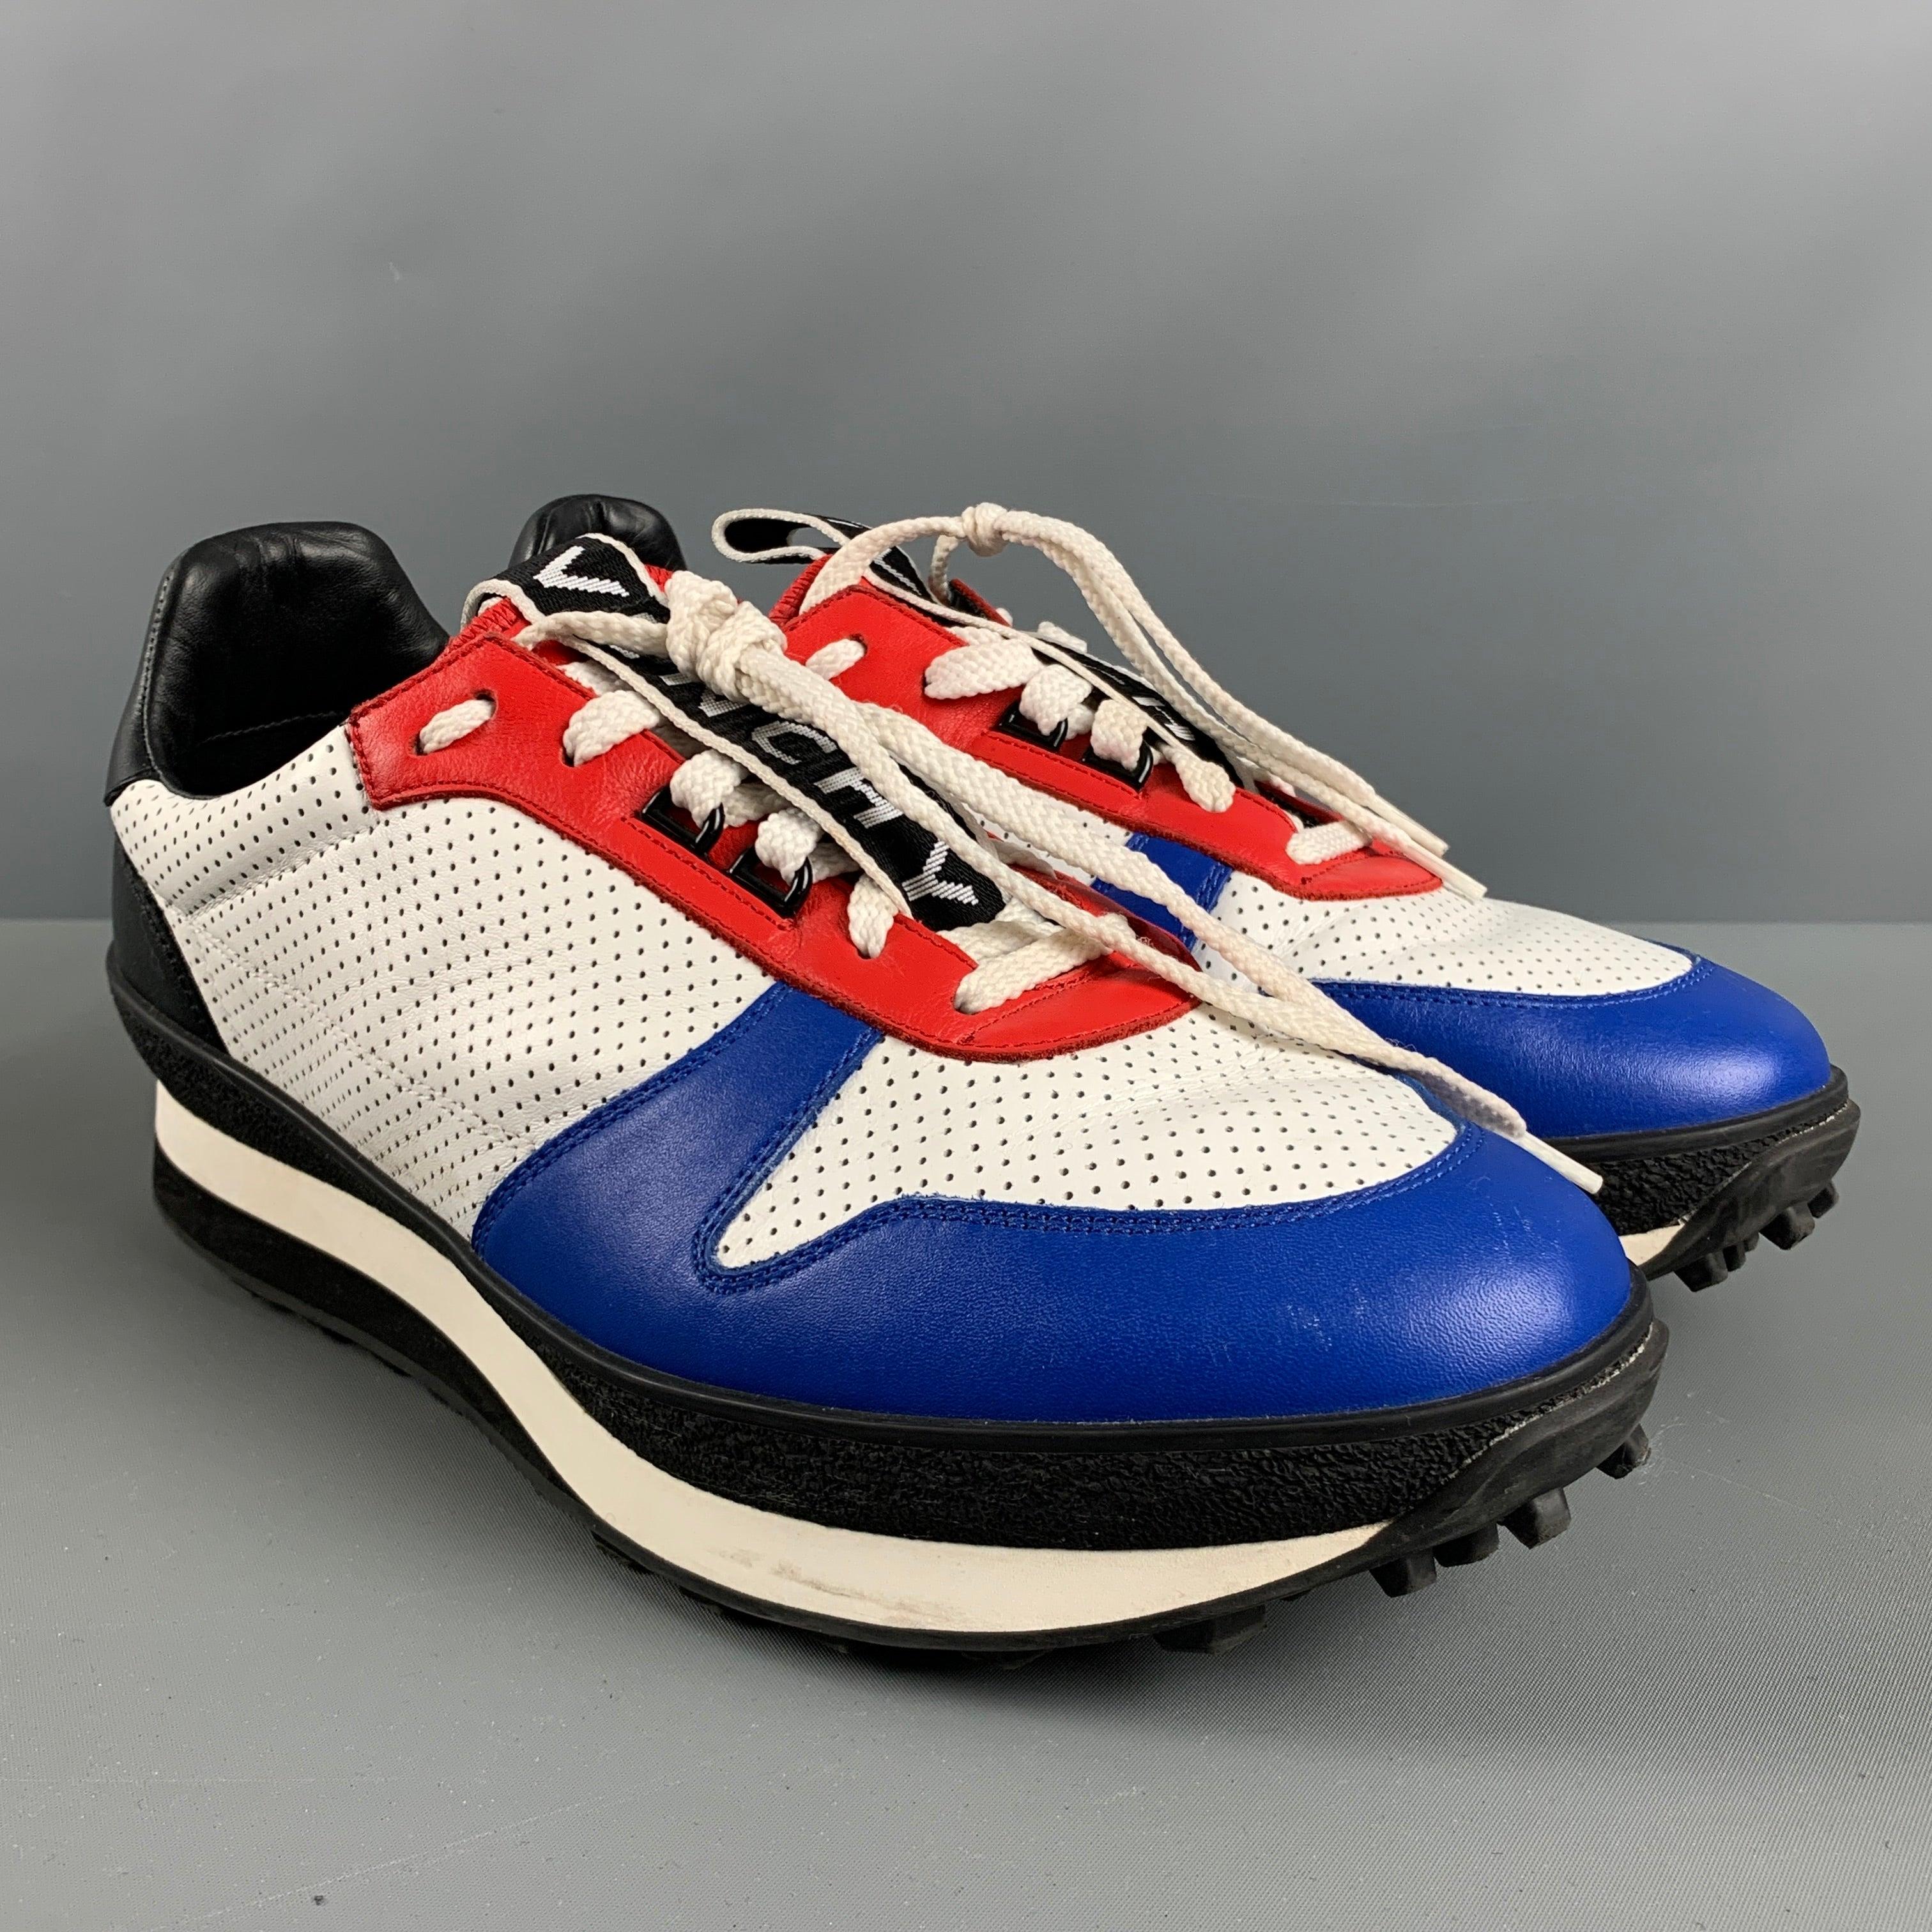 GIVENCHY sneakers comes in a blue, red and white leather featuring a
 low top design, perforated leather, and a rubber sole. Made in Italy. Very Good Pre-Owned Condition. 

Marked:   FR 0178Outsole: 12.5 inches  x 4.25 inches Large Logo
  
  
